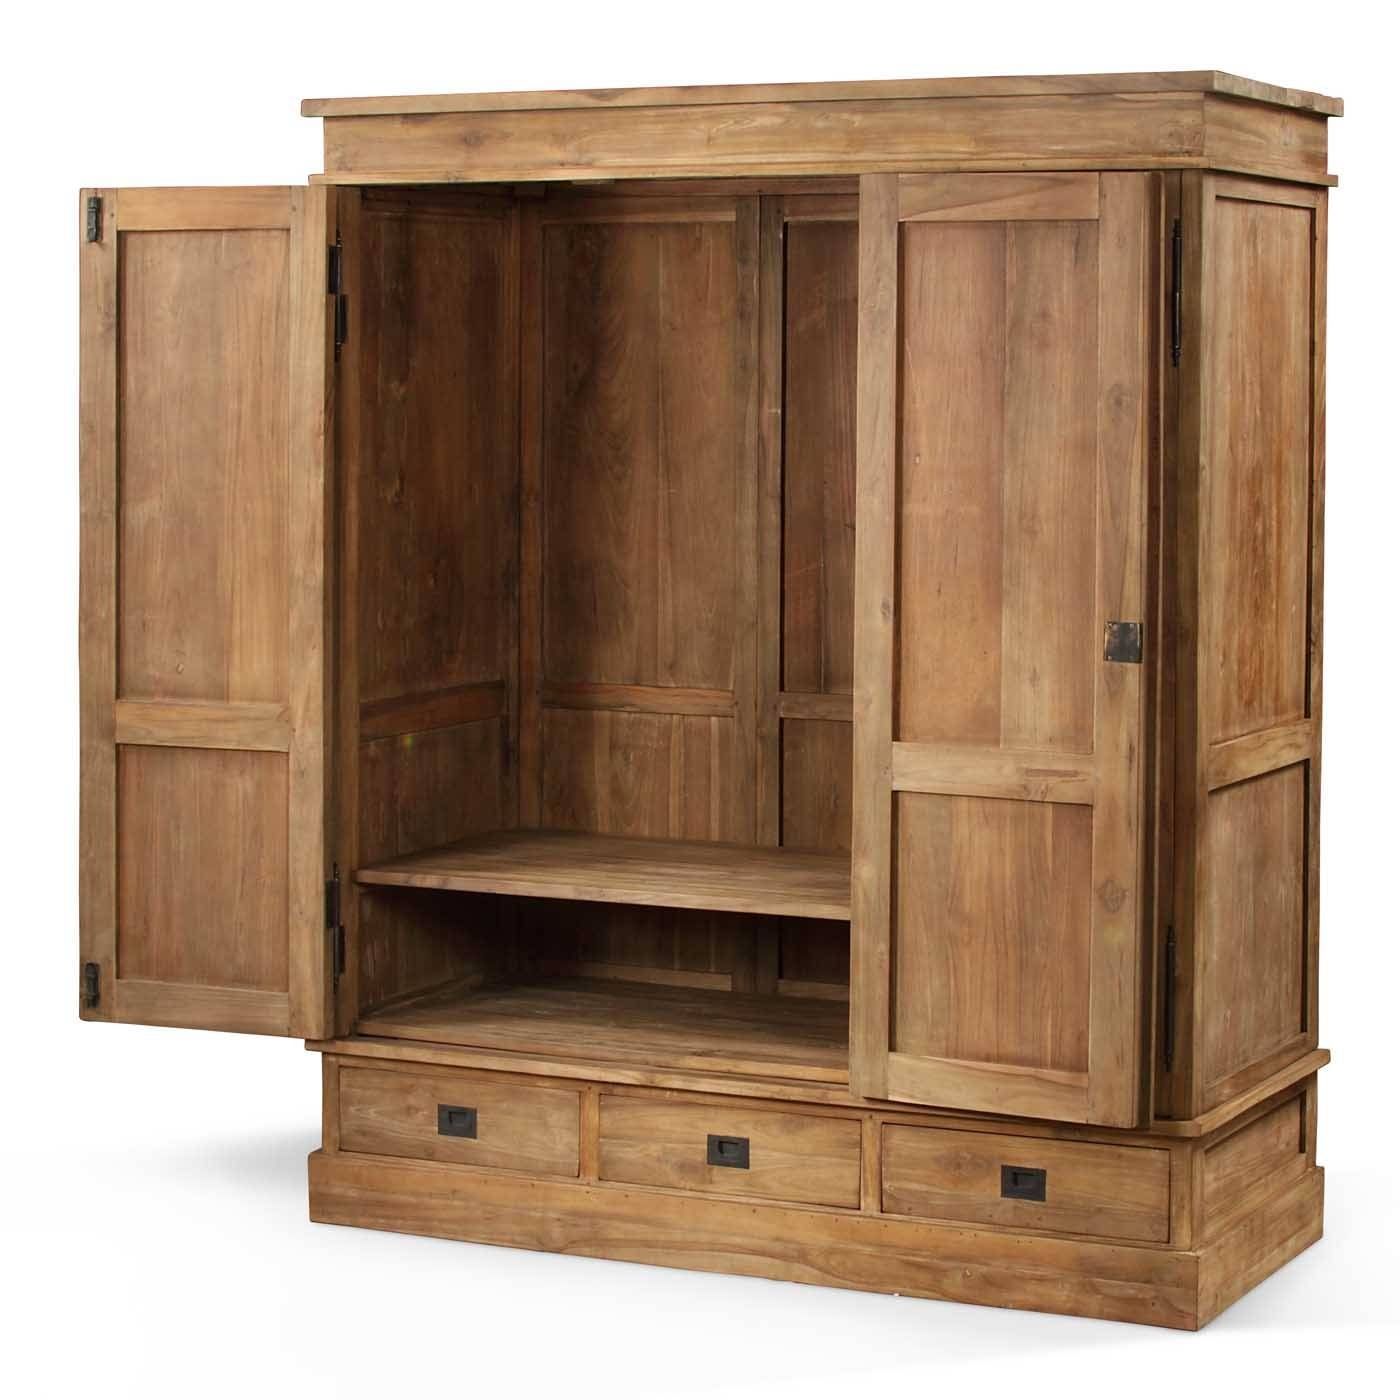 Bedroom Furniture : Almirah Design Solid Wood Armoire Cheap Wooden Within Cheap Wood Wardrobes (View 15 of 15)